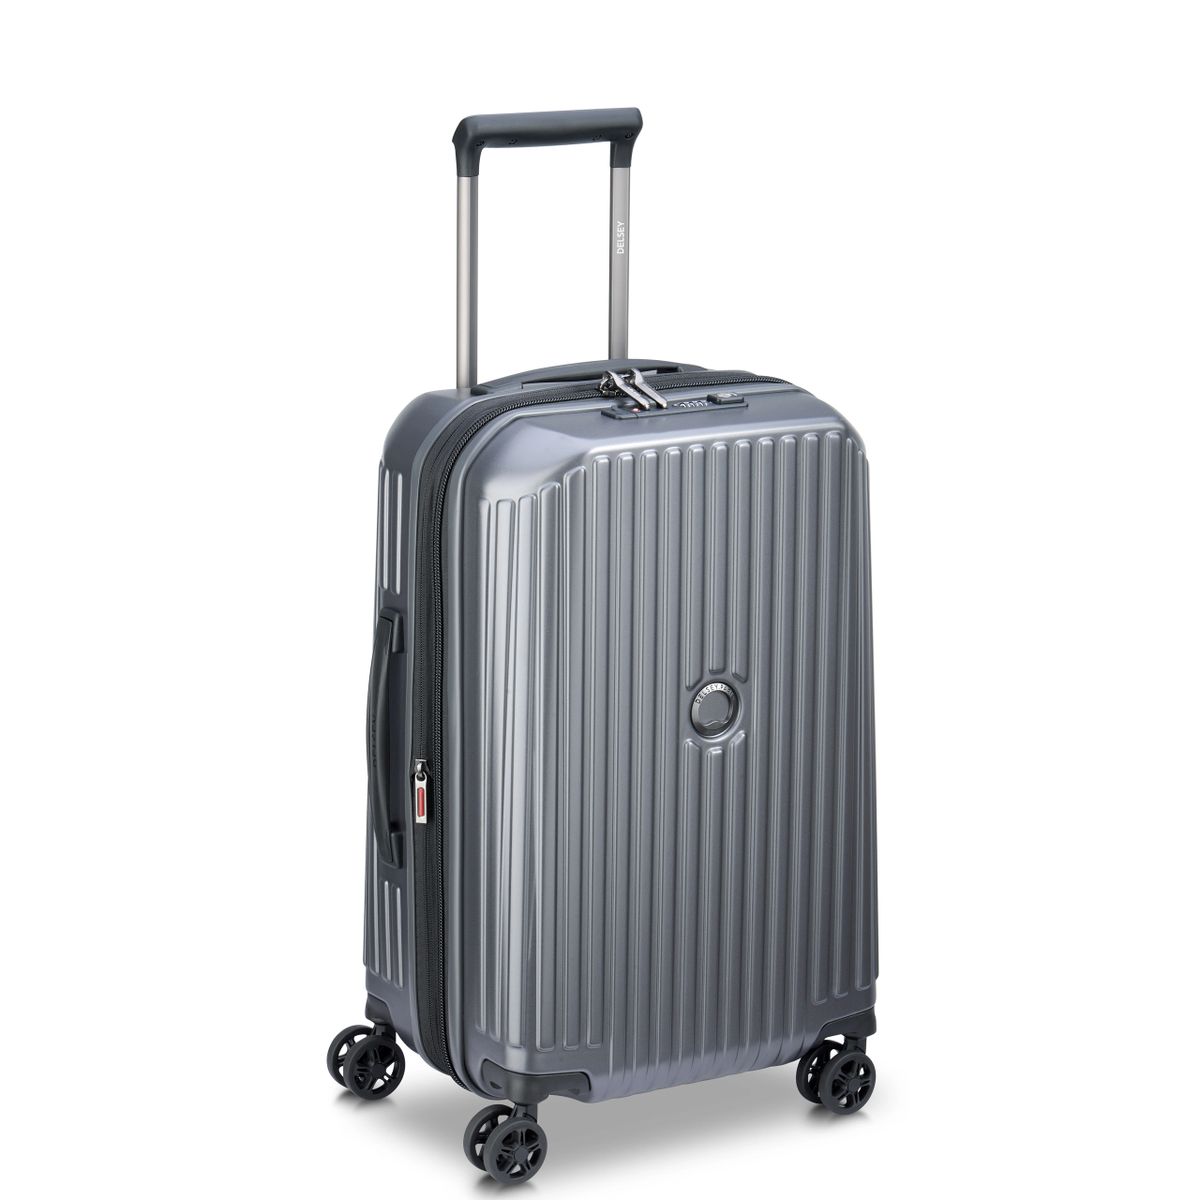 Securitime Zip International Exp. Spinner Carry-On